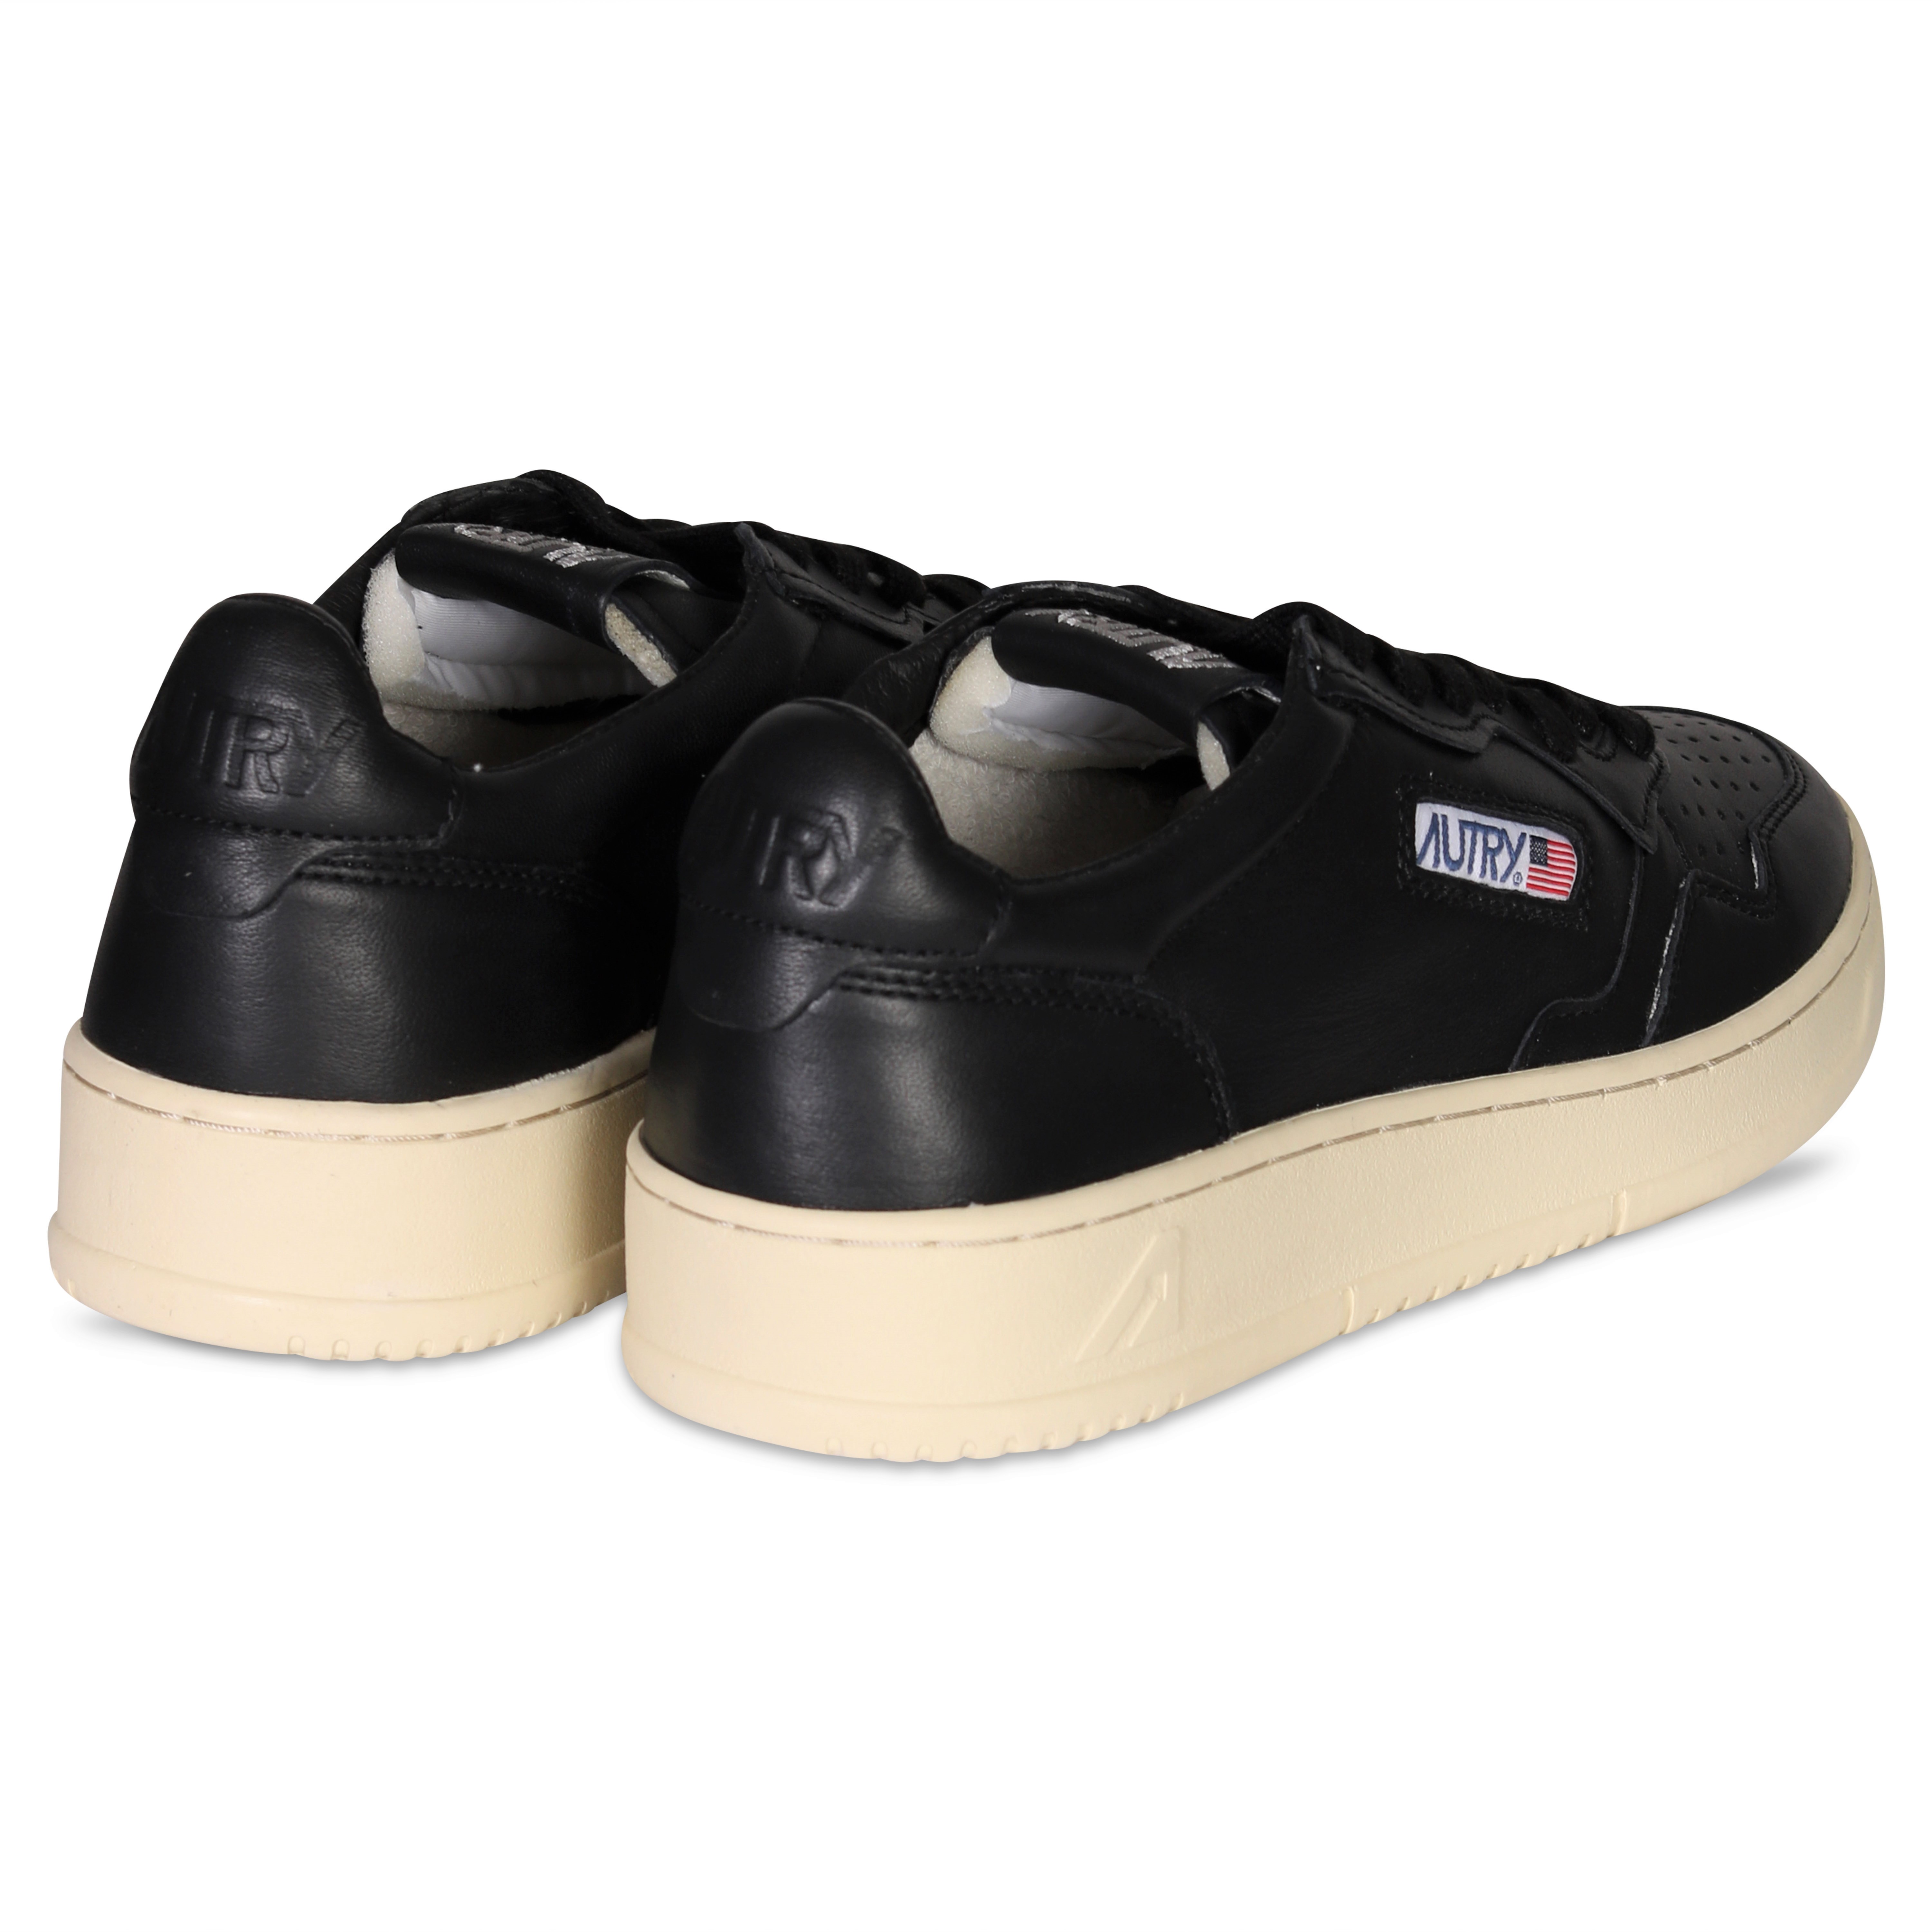 Autry Action Shoes Low Sneaker Goat in Black